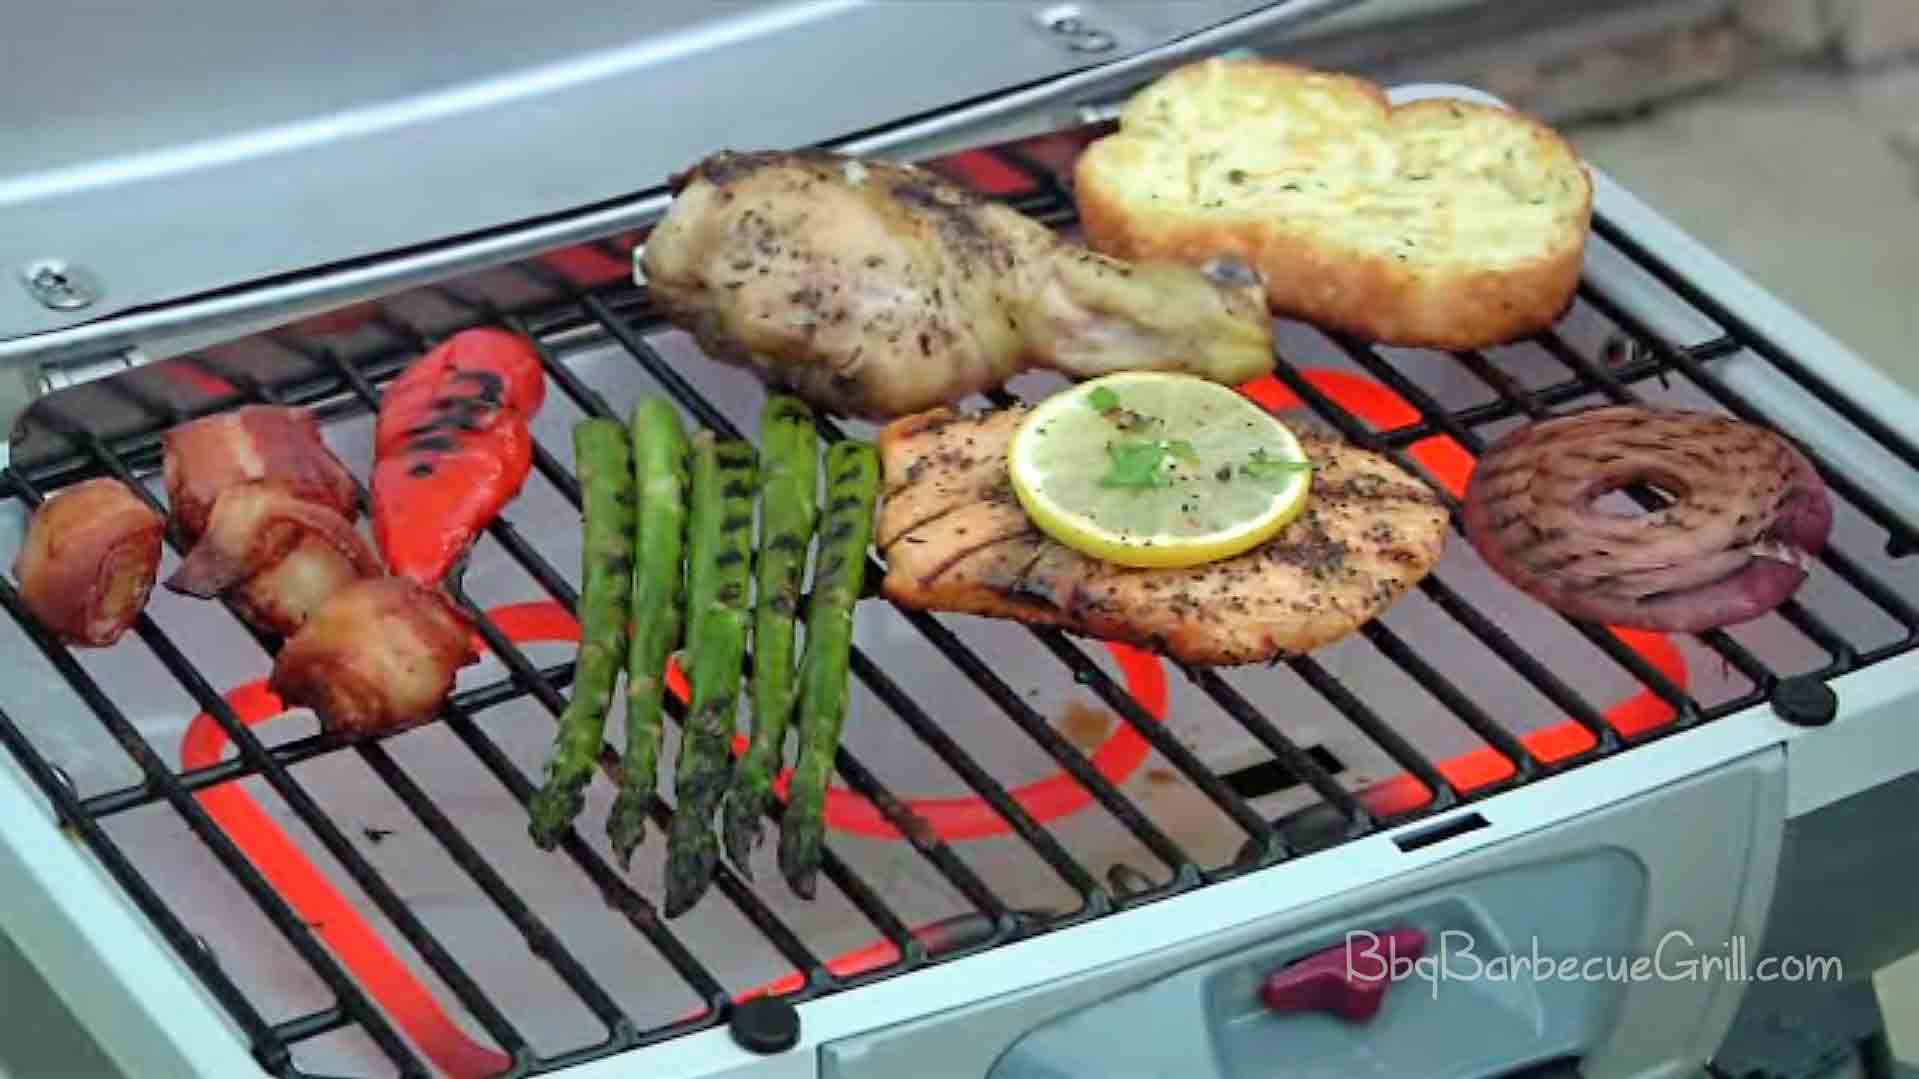 Best stand up electric grill